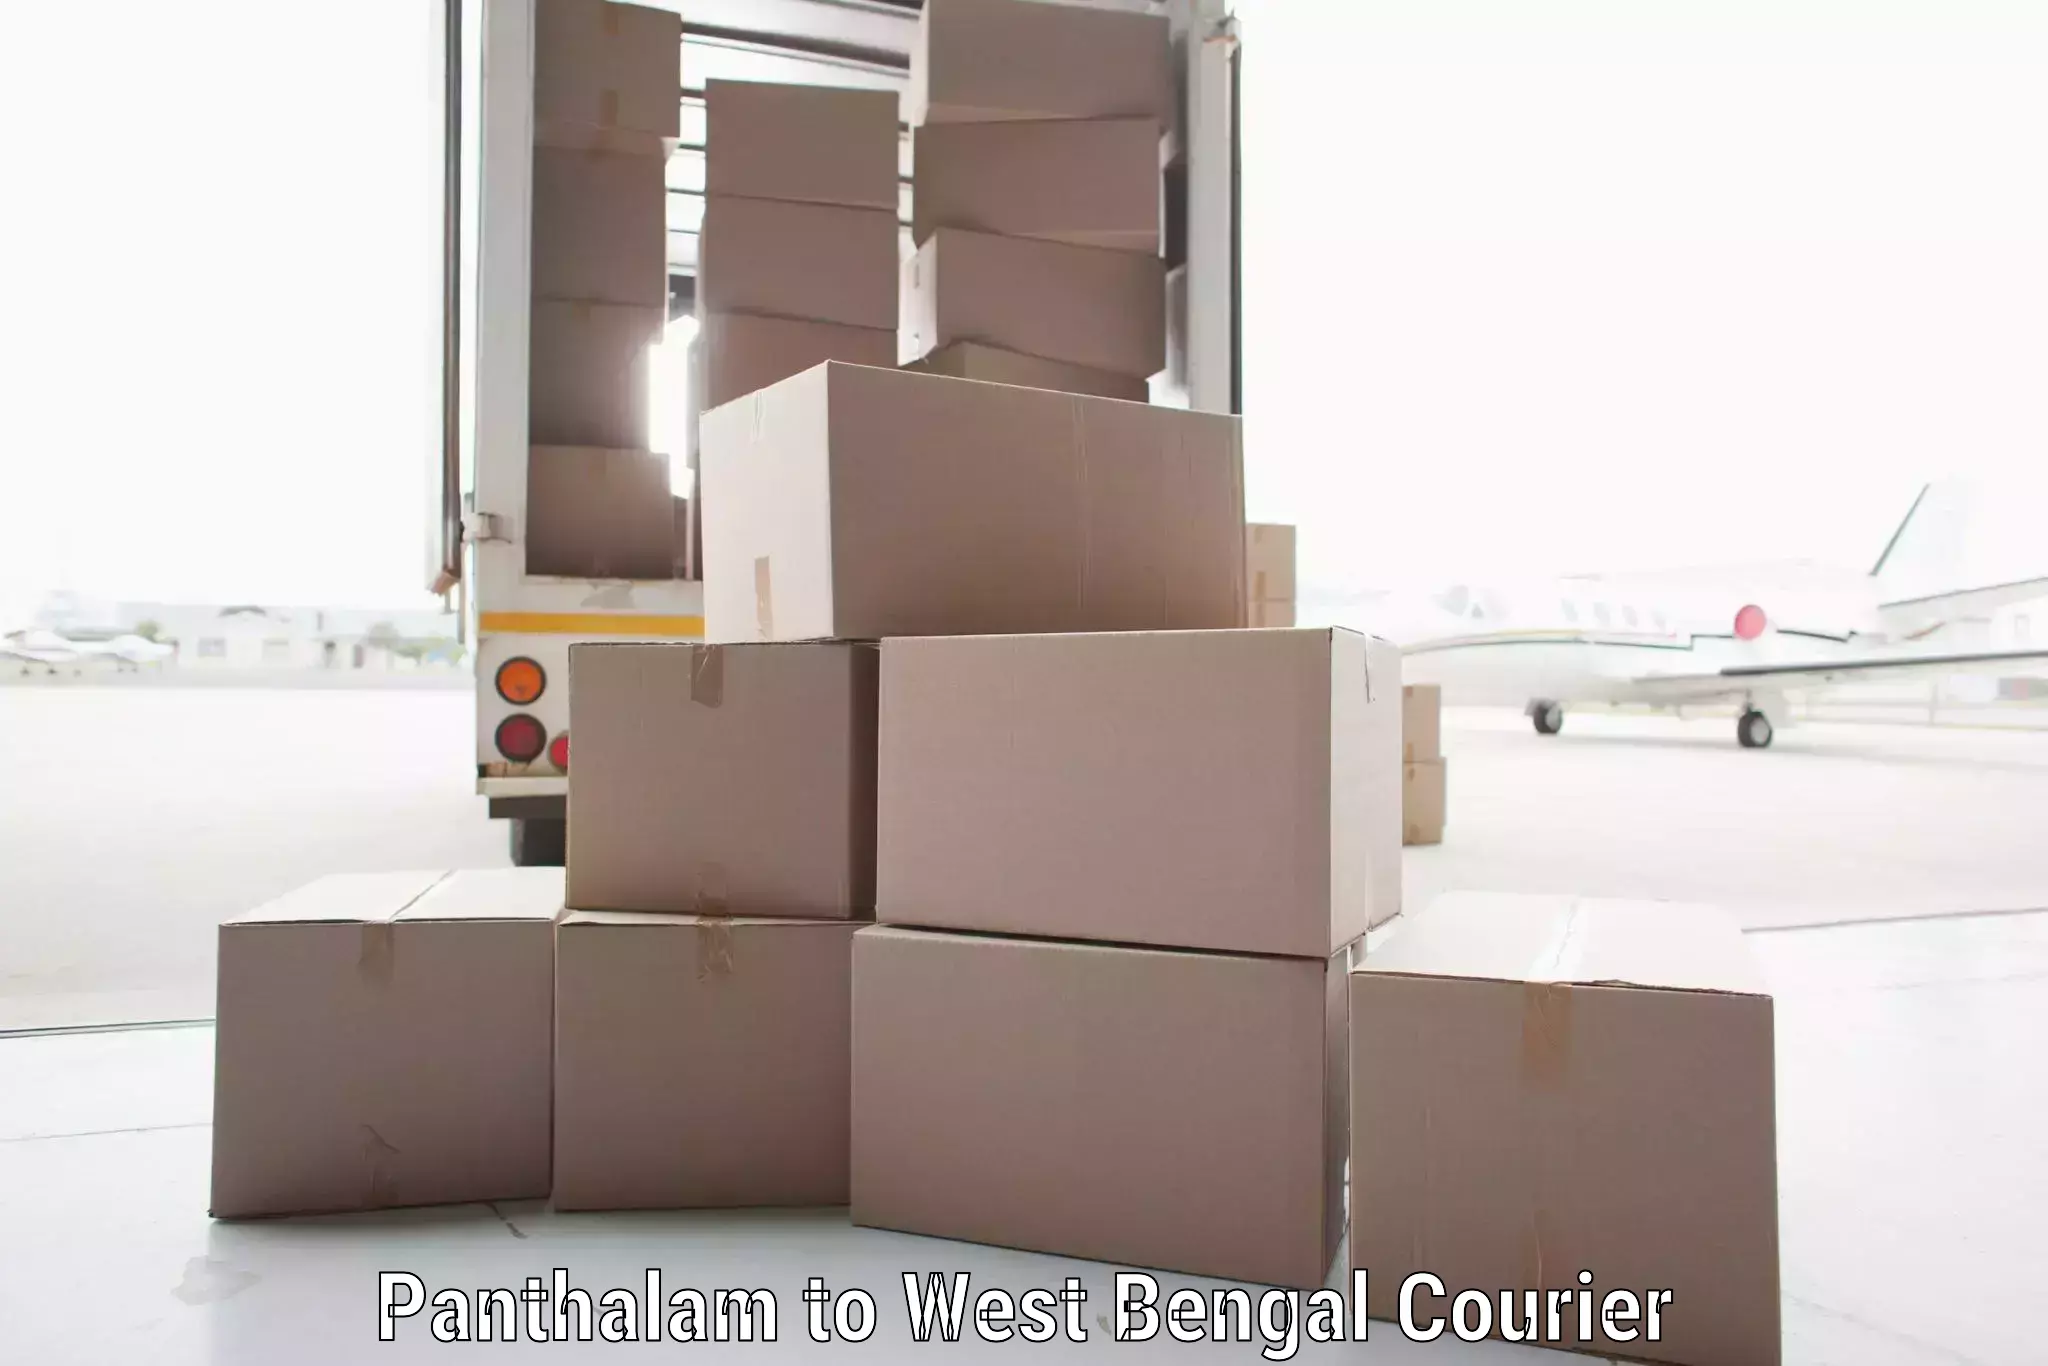 Courier service partnerships Panthalam to Paschim Medinipur